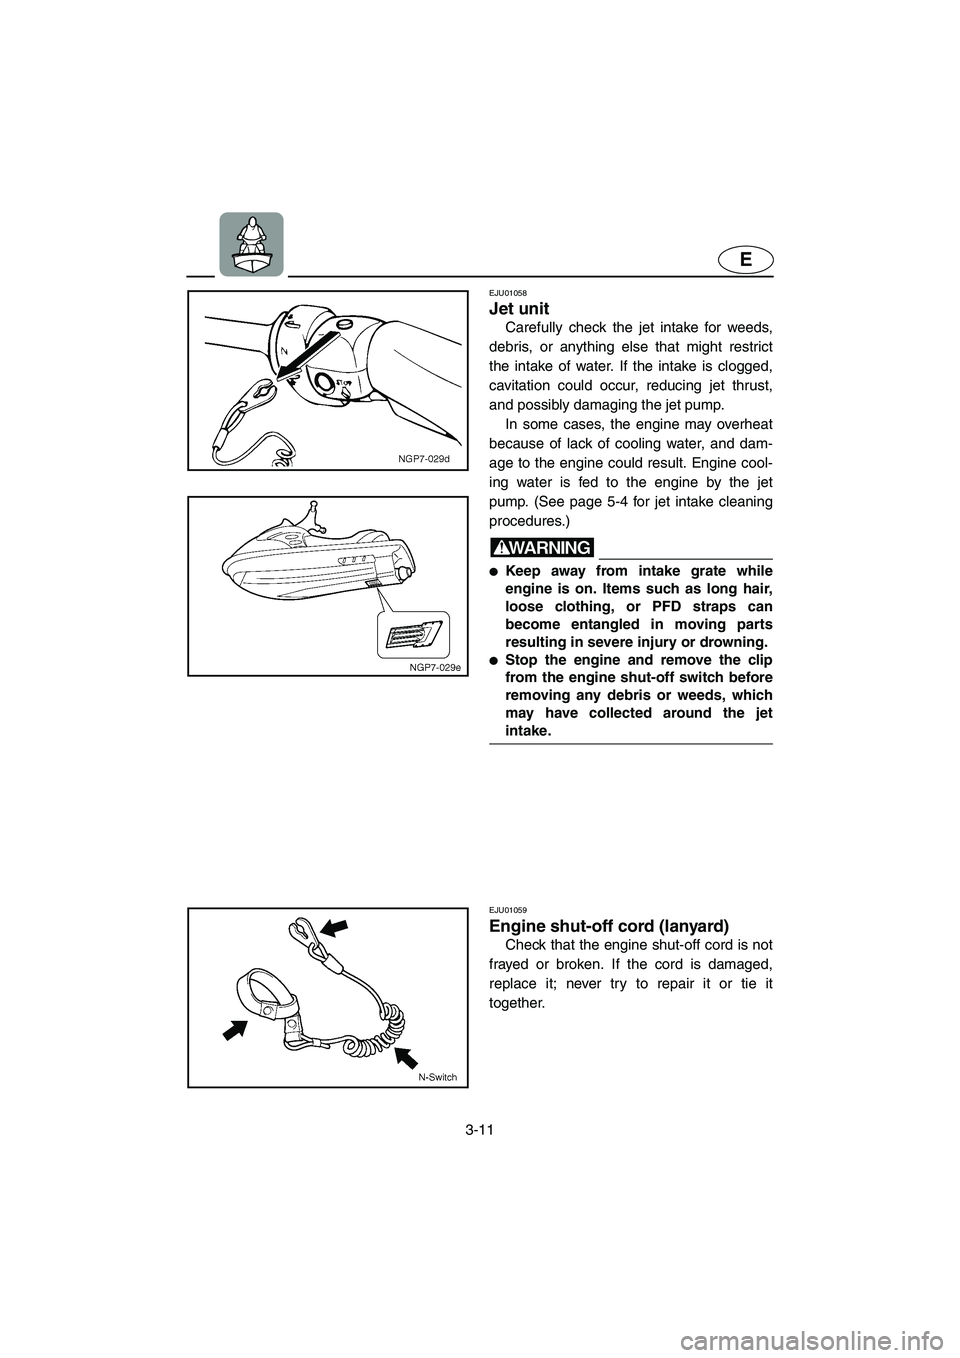 YAMAHA GP800R 2002  Owners Manual 3-11
E
EJU01058 
Jet unit  
Carefully check the jet intake for weeds,
debris, or anything else that might restrict
the intake of water. If the intake is clogged,
cavitation could occur, reducing jet t